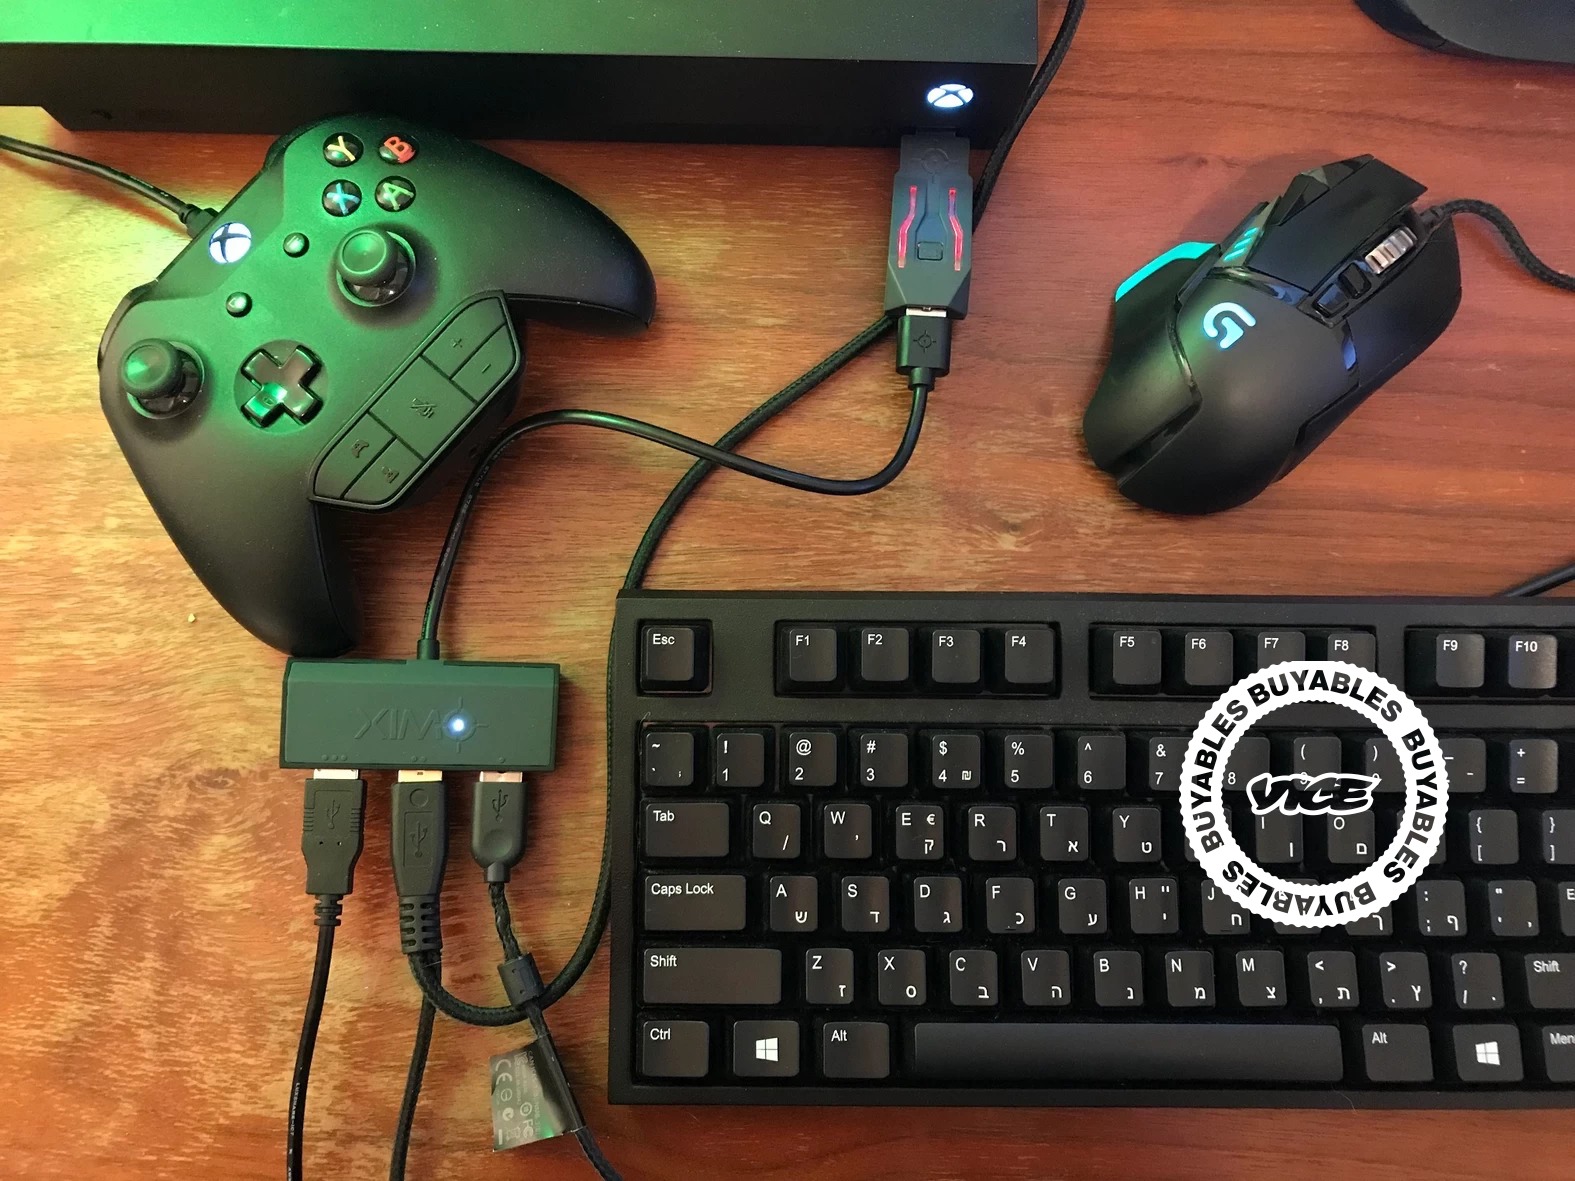 How to Use a Mouse and Keyboard on PS4 or Xbox One